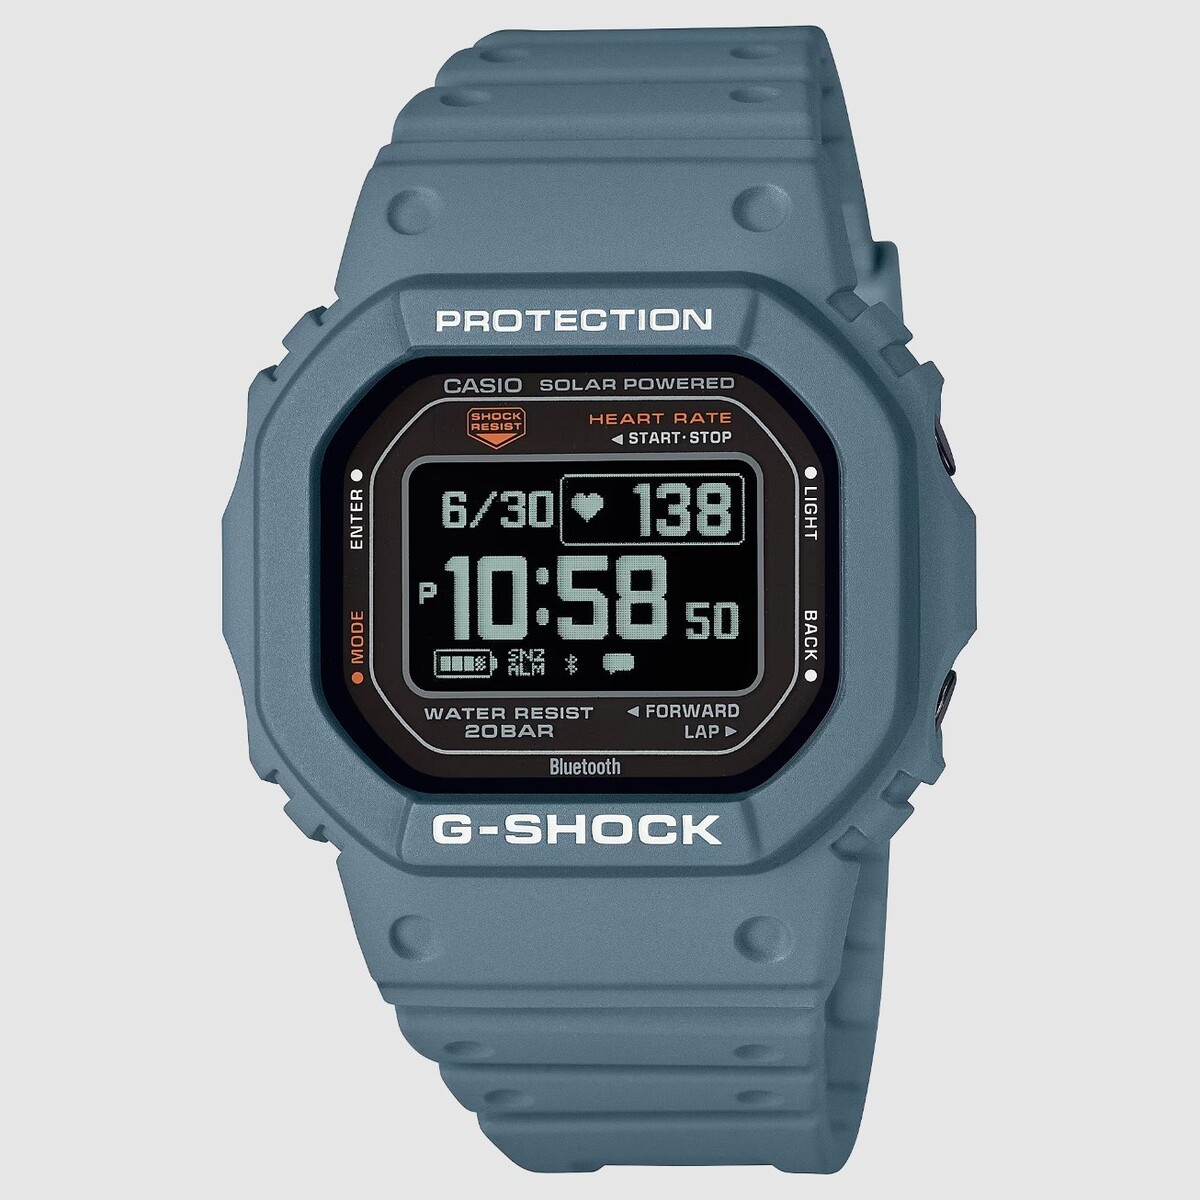 G-SHOCK now available in US - NotebookCheck.net News